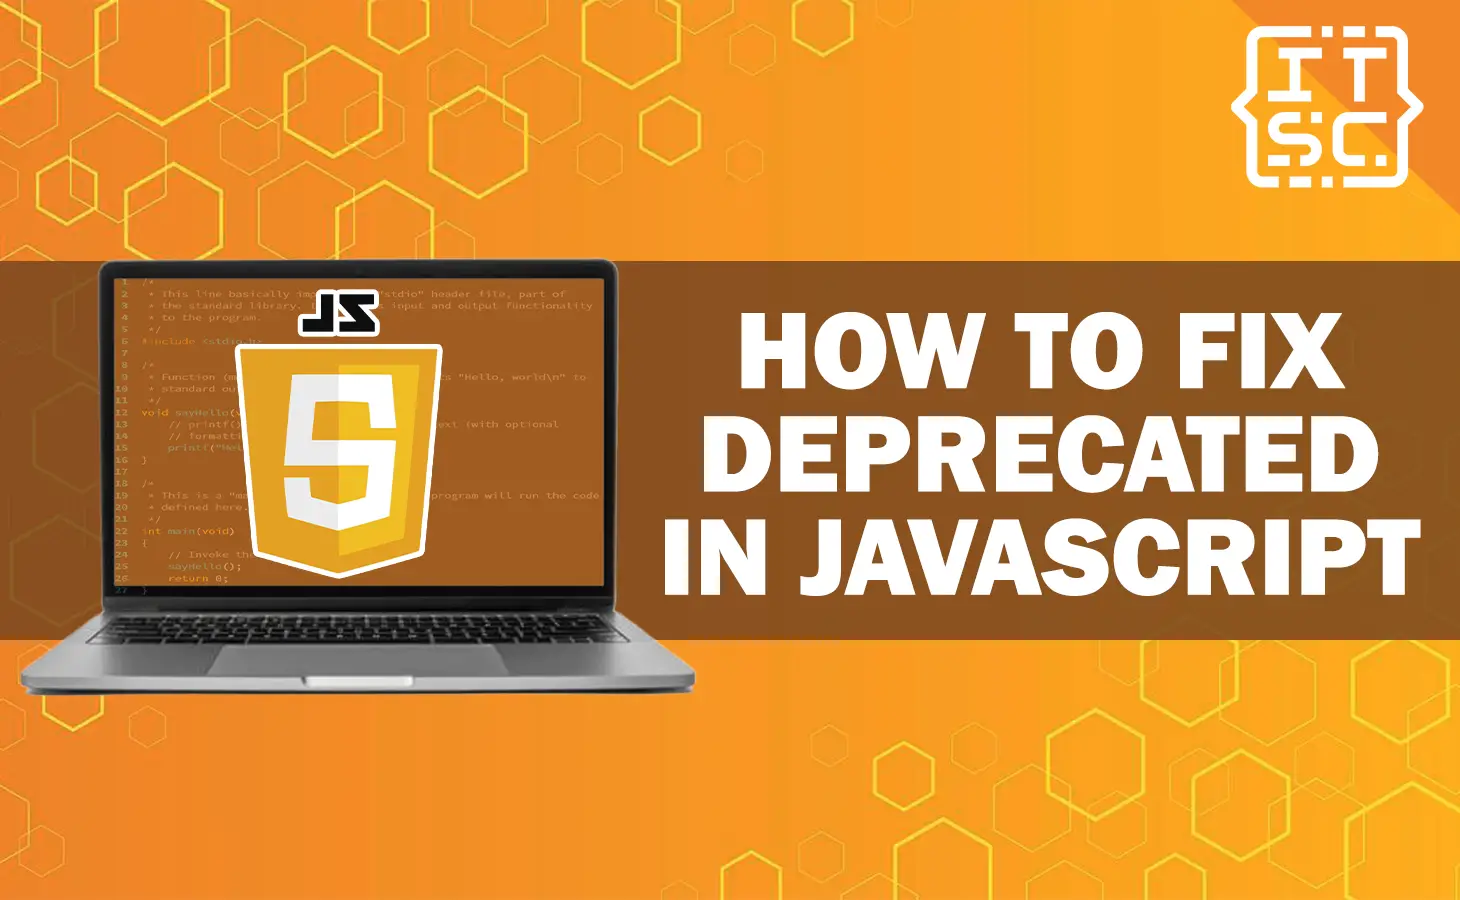 How to Fix Deprecated in JavaScript